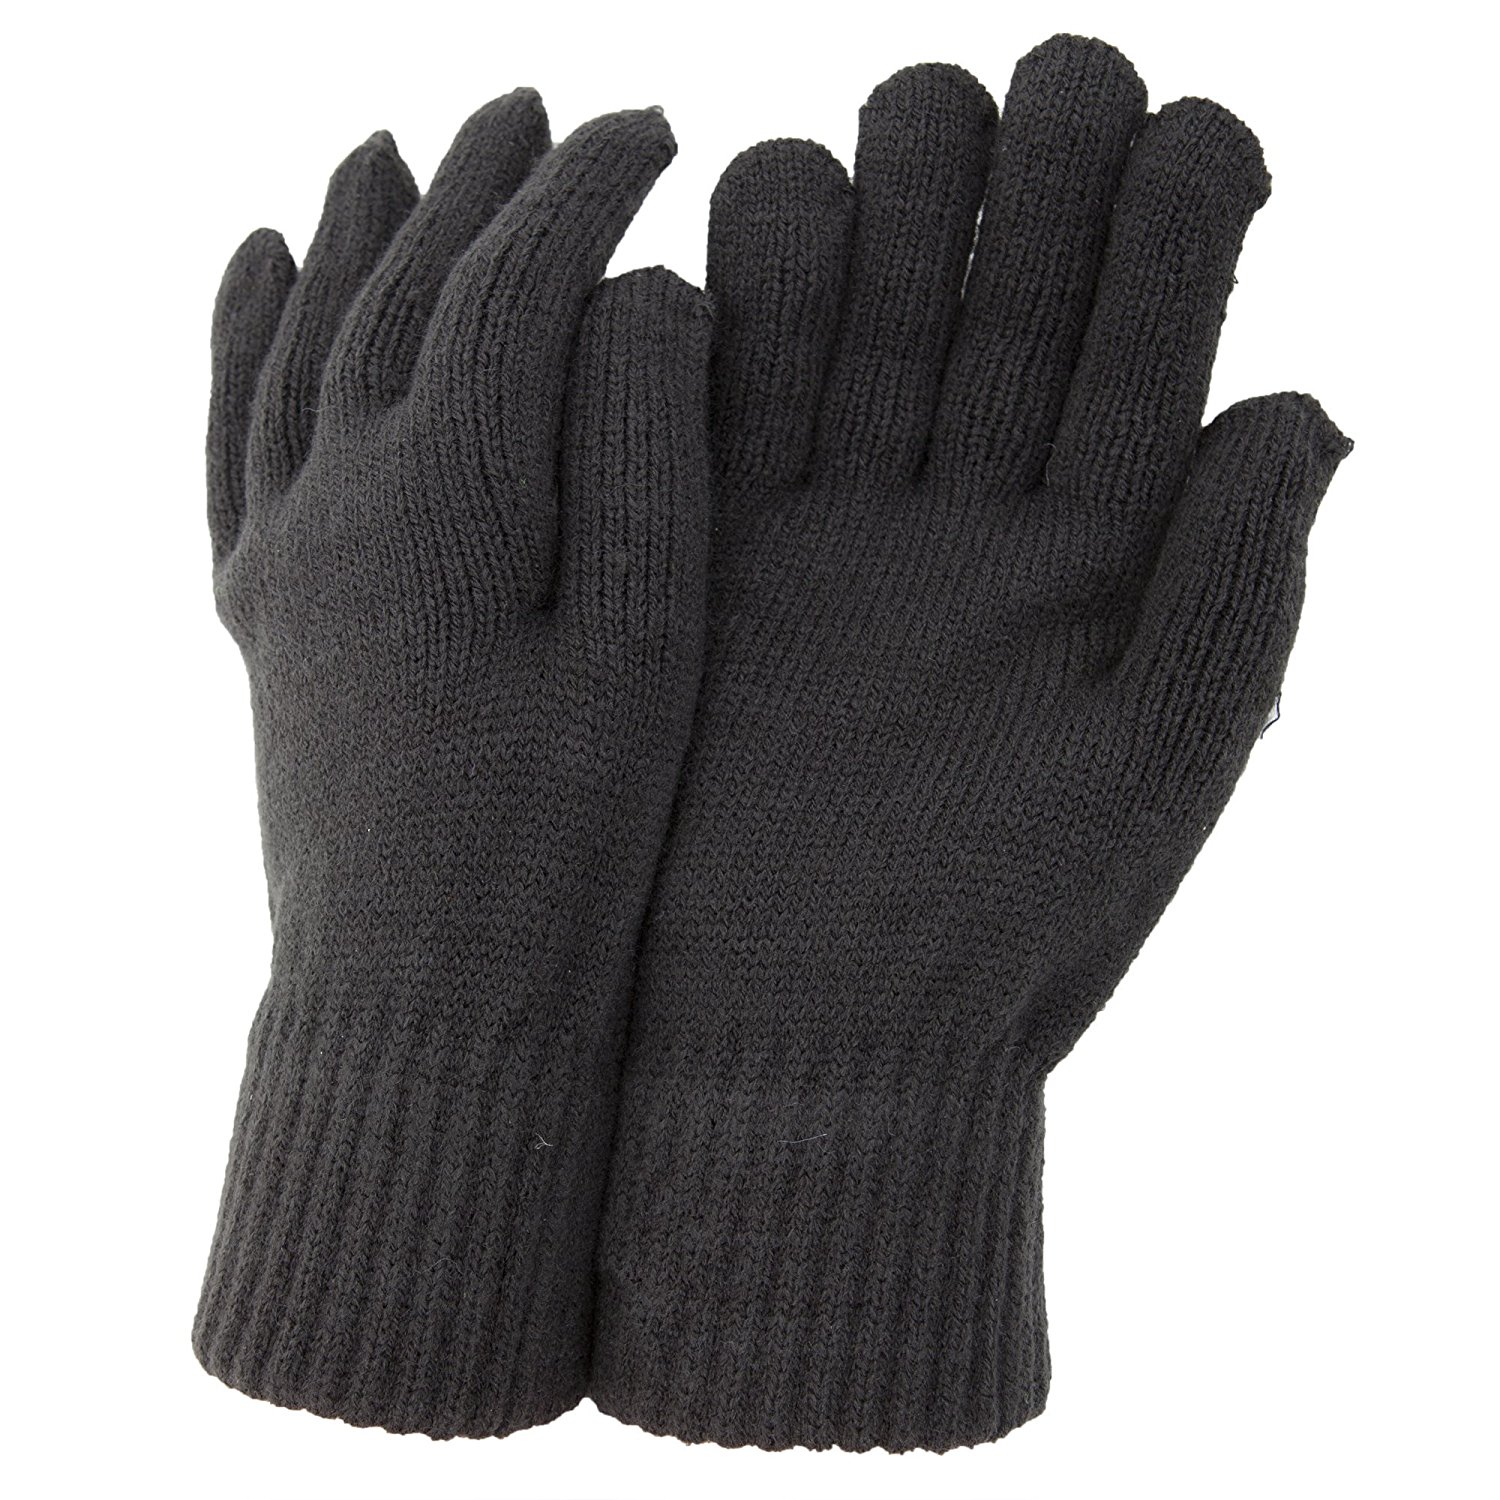 Mens Winter Gloves (One Size) (Black) at Amazon Men's Clothing store ...